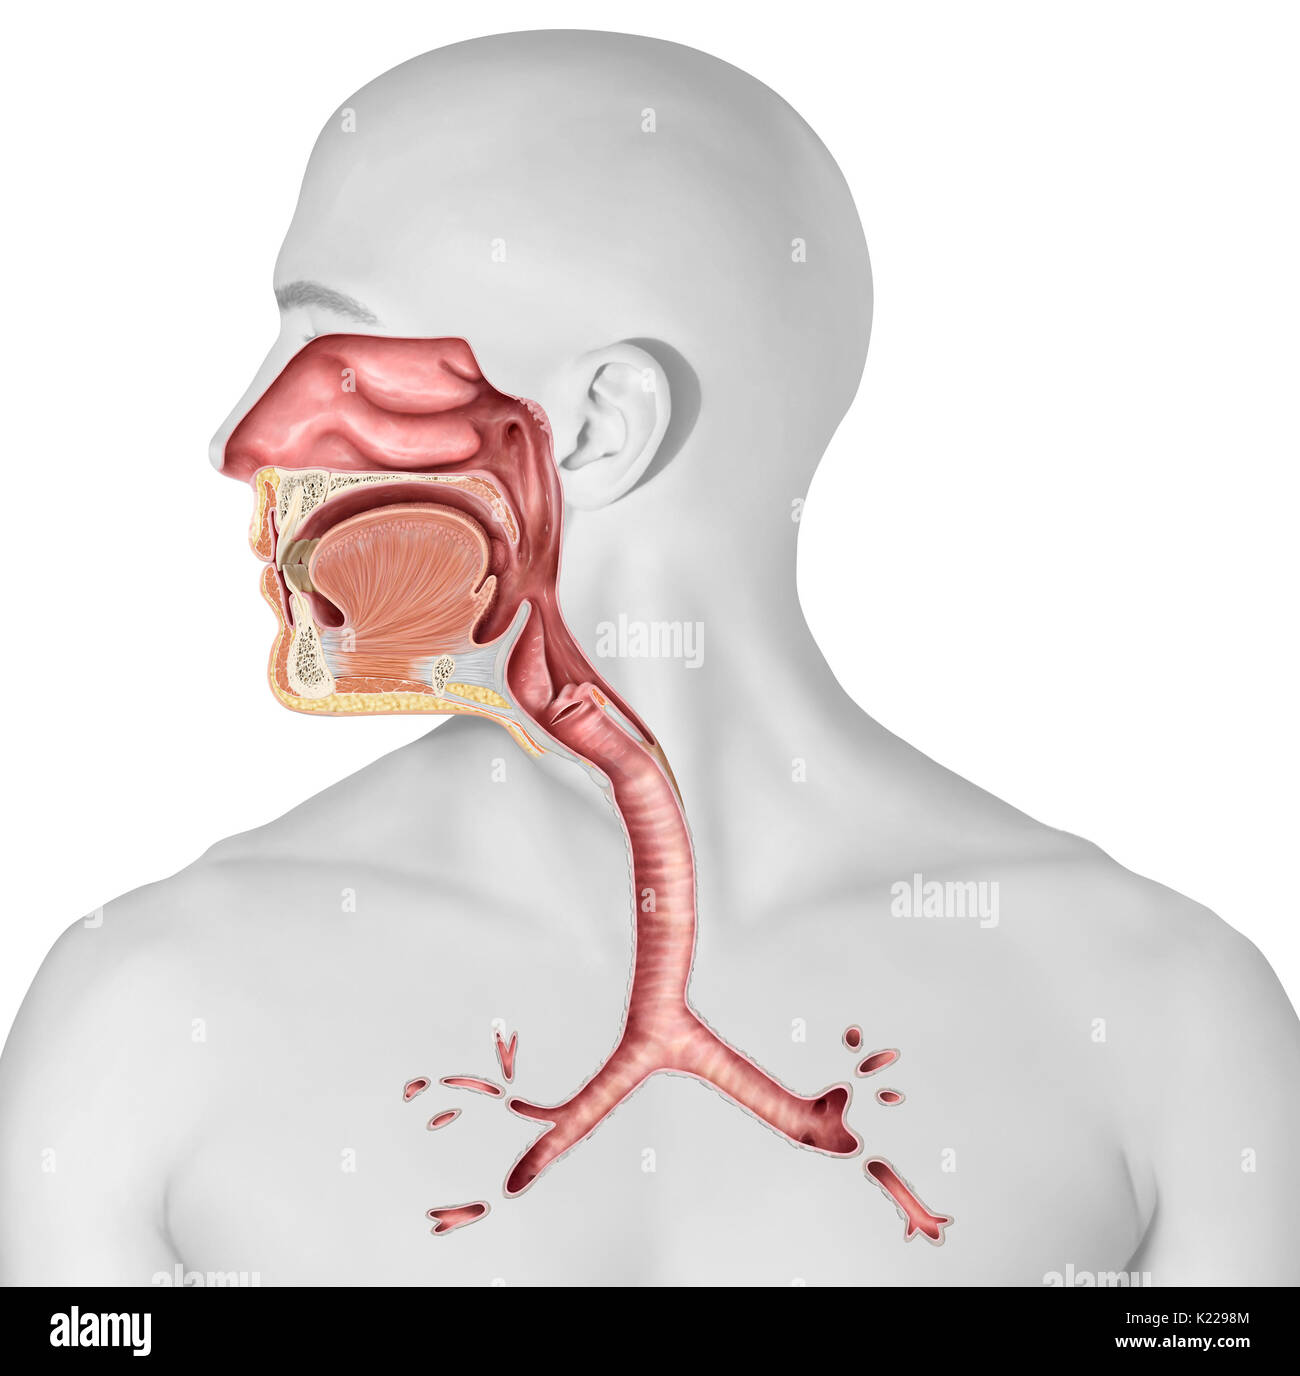 This image shows the upper organs of the respiratory system, which are the nasal cavity, the epiglottis, the larynx, and the pharynx. It also shows a cross section of the trachea. Stock Photo